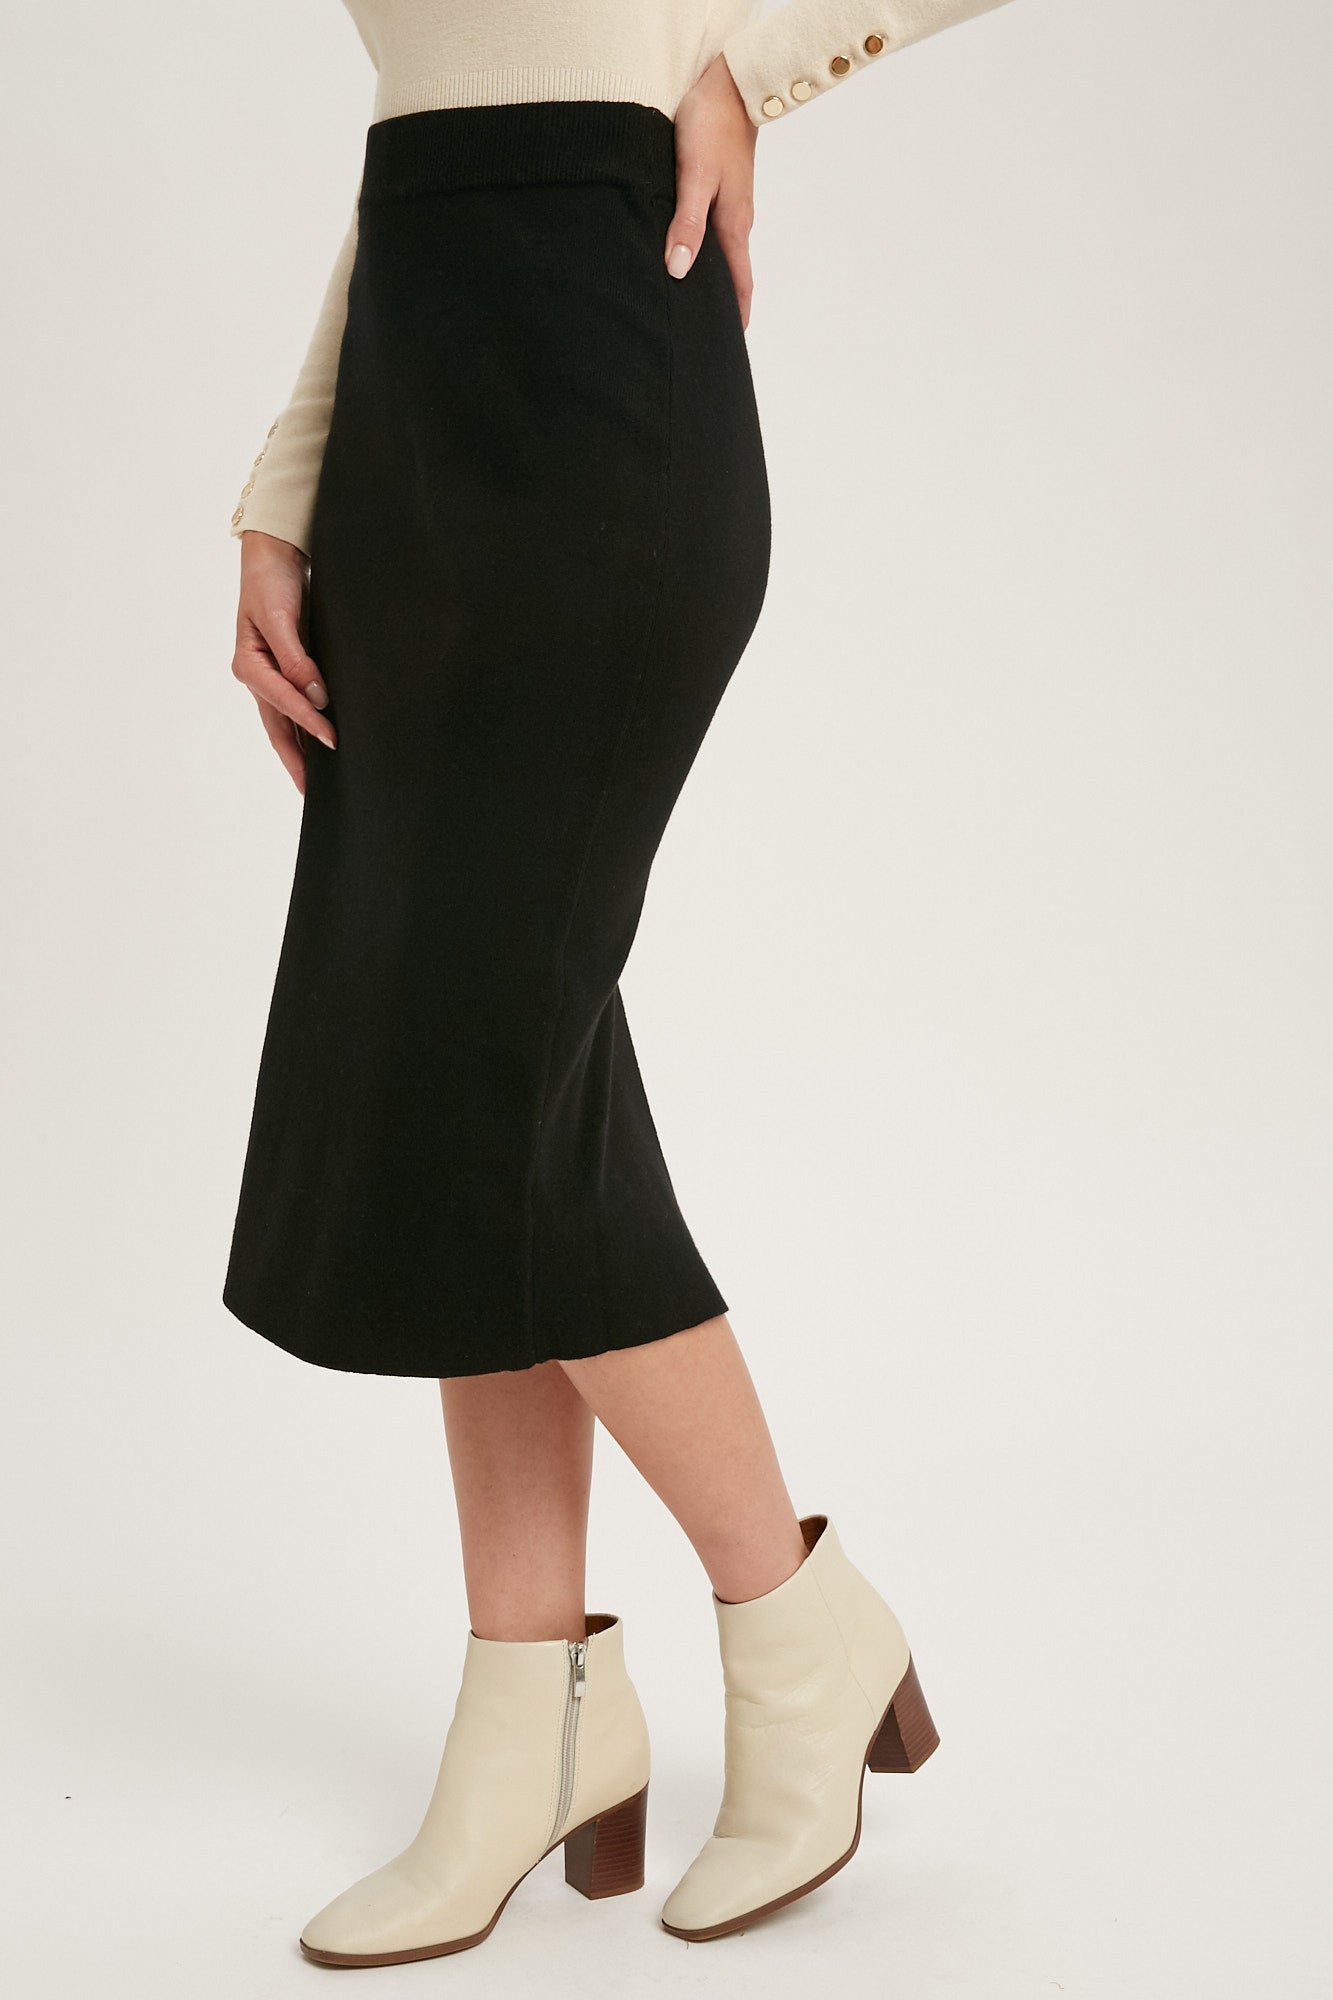 Black knit skirt with slit in the back, size small to large.